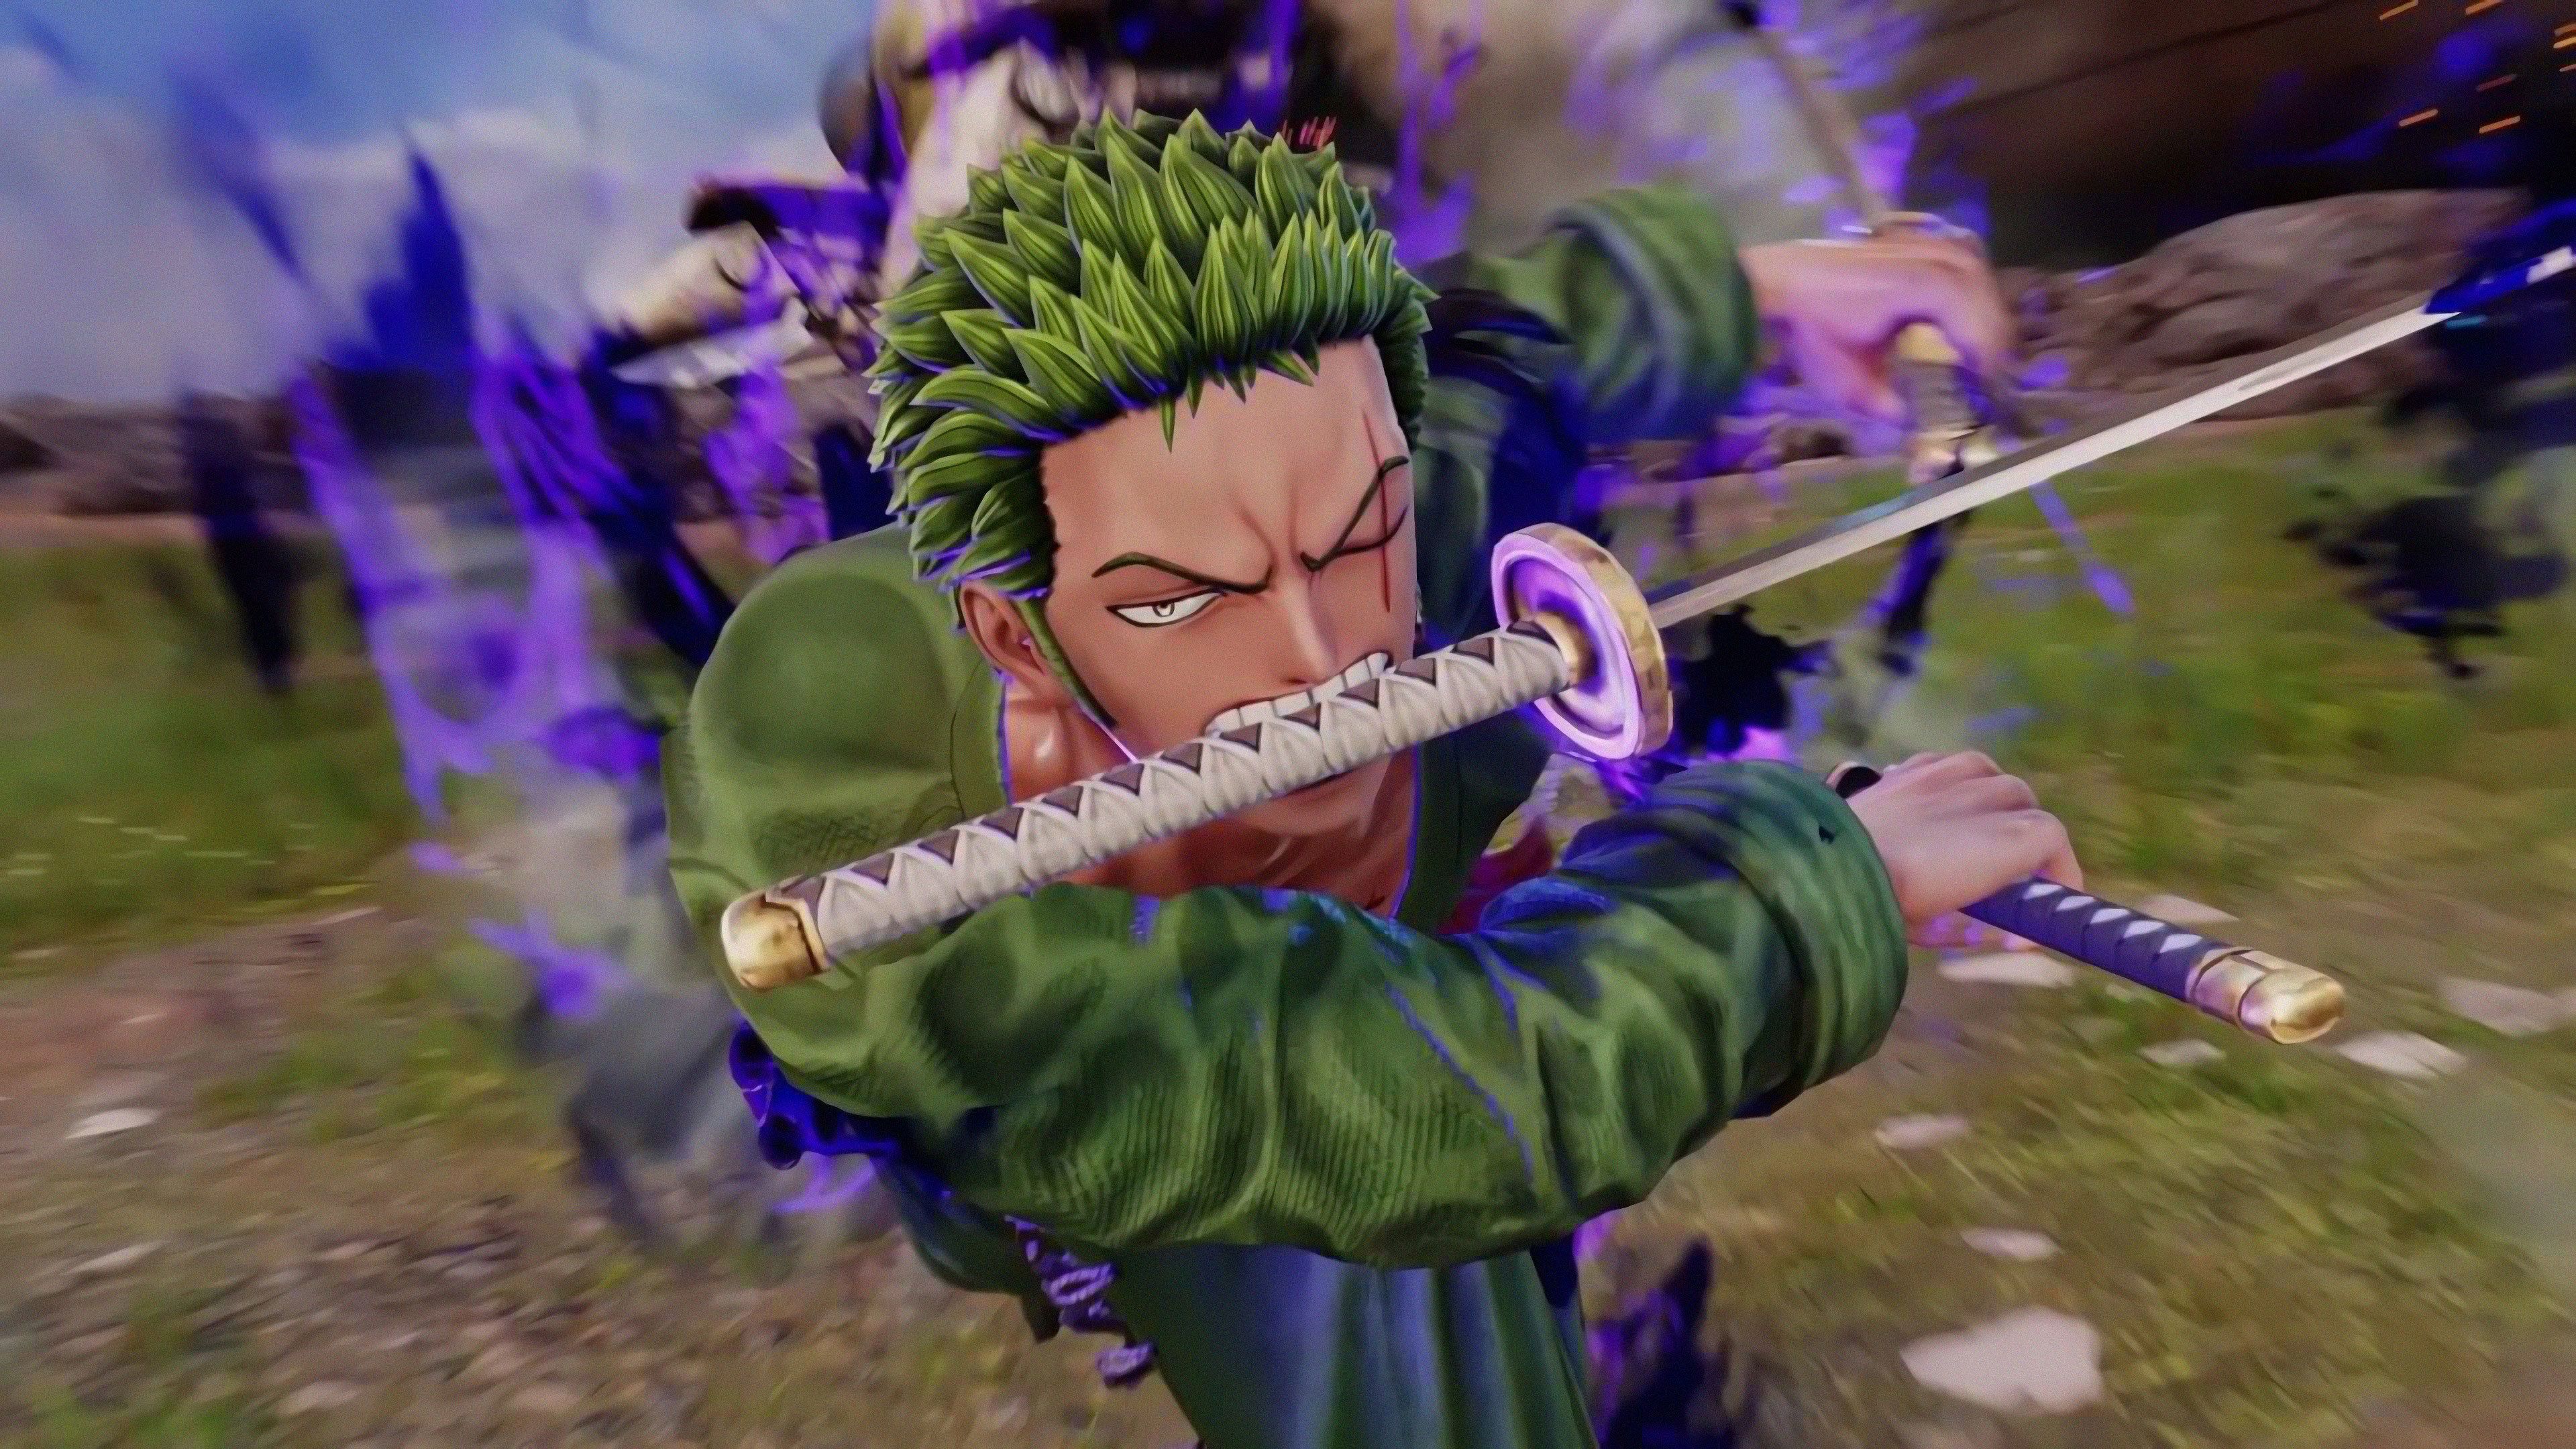 Download 3840x2160 wallpaper jump force, roronoa zoro, video game, one piece, anime, 4k, uhd 16: widescreen, 3840x2160 HD image, background, 19059